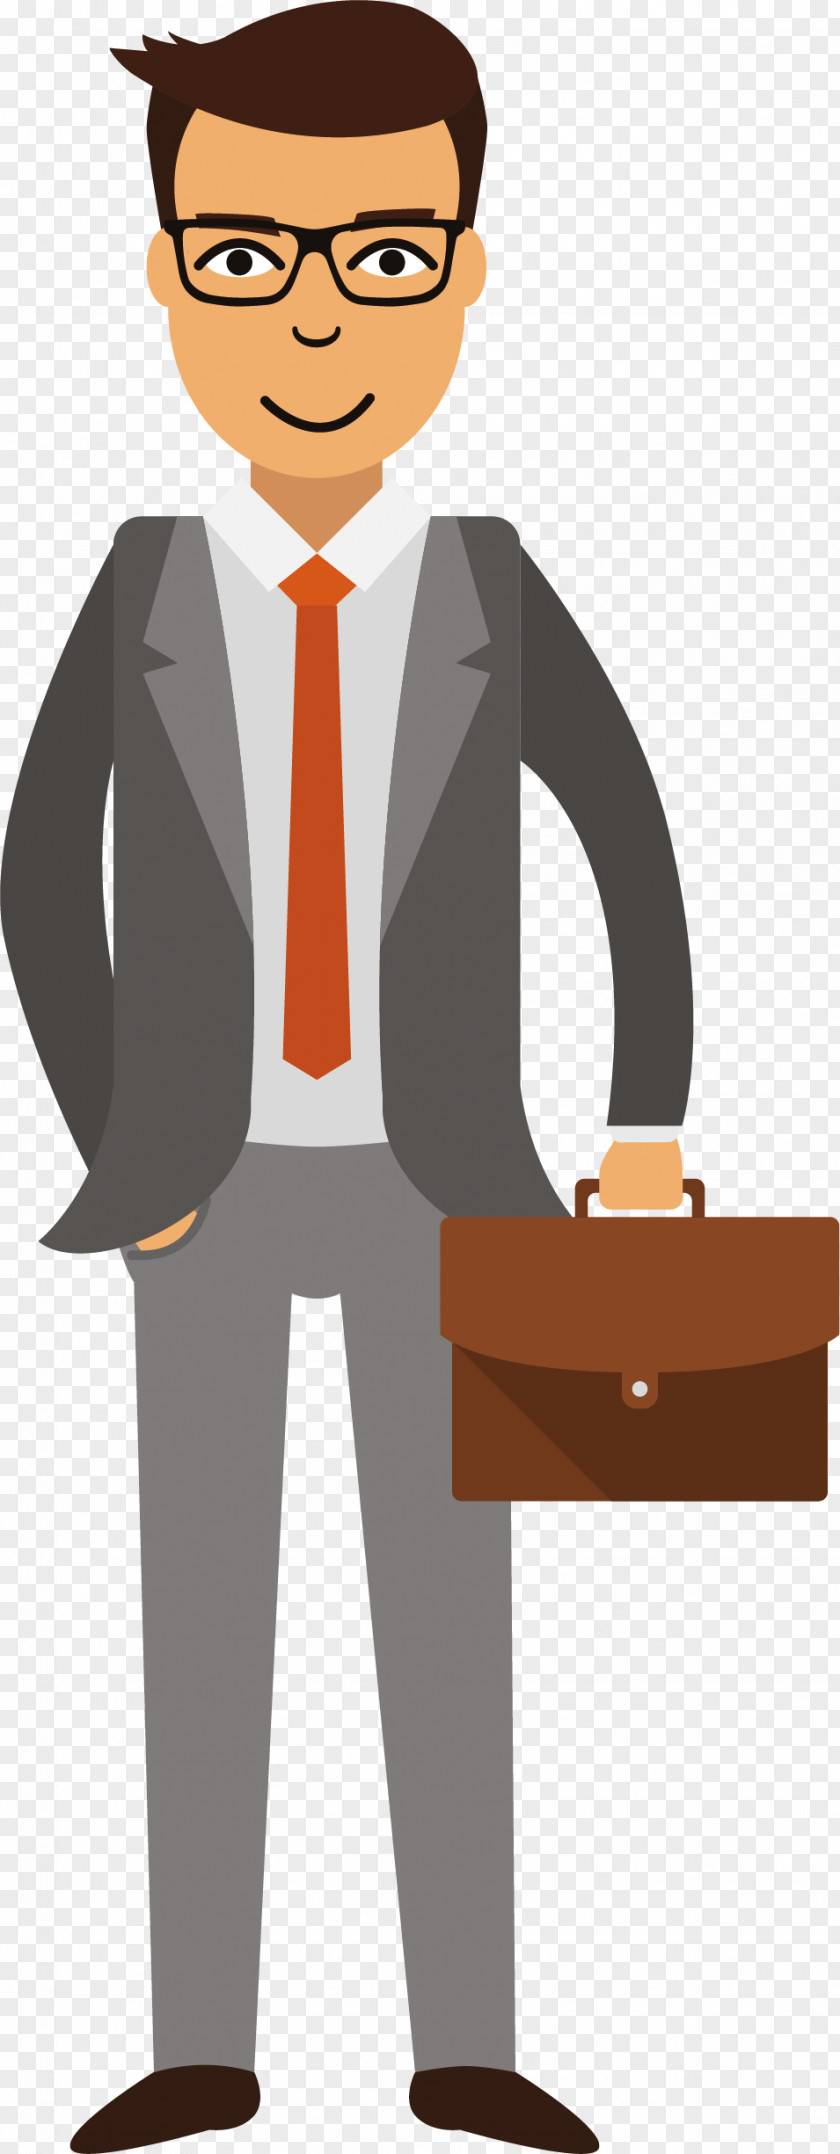 Suit Man Vector Cartoon Photography Royalty-free Illustration PNG